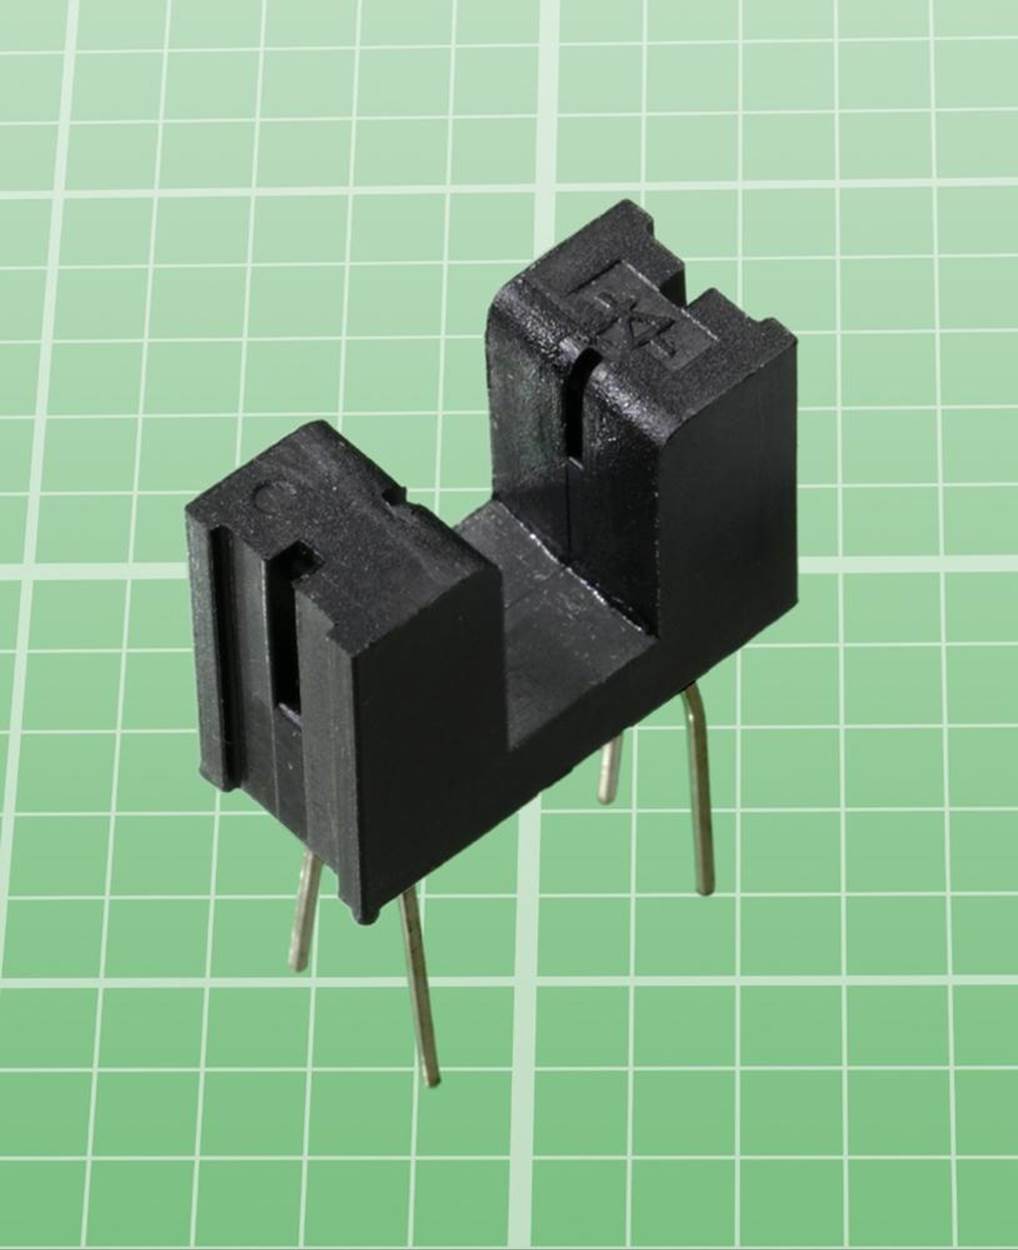 In this Everlight ITR9606-F transmissive sensor, light is transmitted across the gap to a phototransistor facing it in the other half of the component. The schematic symbol for a diode is just visible, molded into the righthand section of the plastic. An infrared LED is mounted in this part.